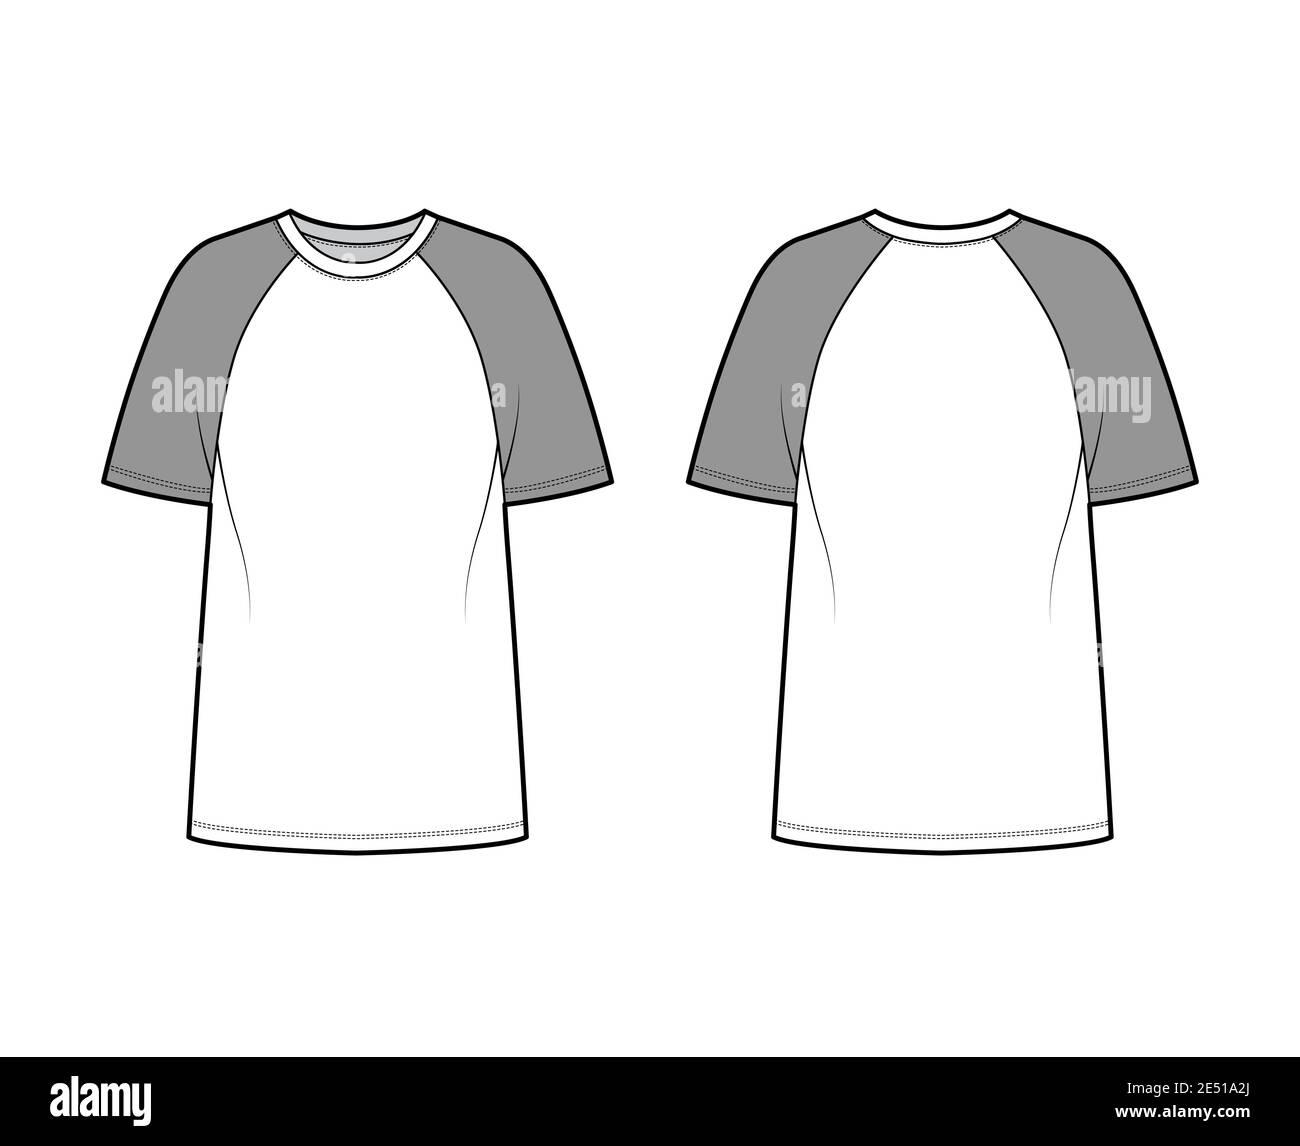 Specification Baseball Jersey T Shirt Mockup Isolated On White